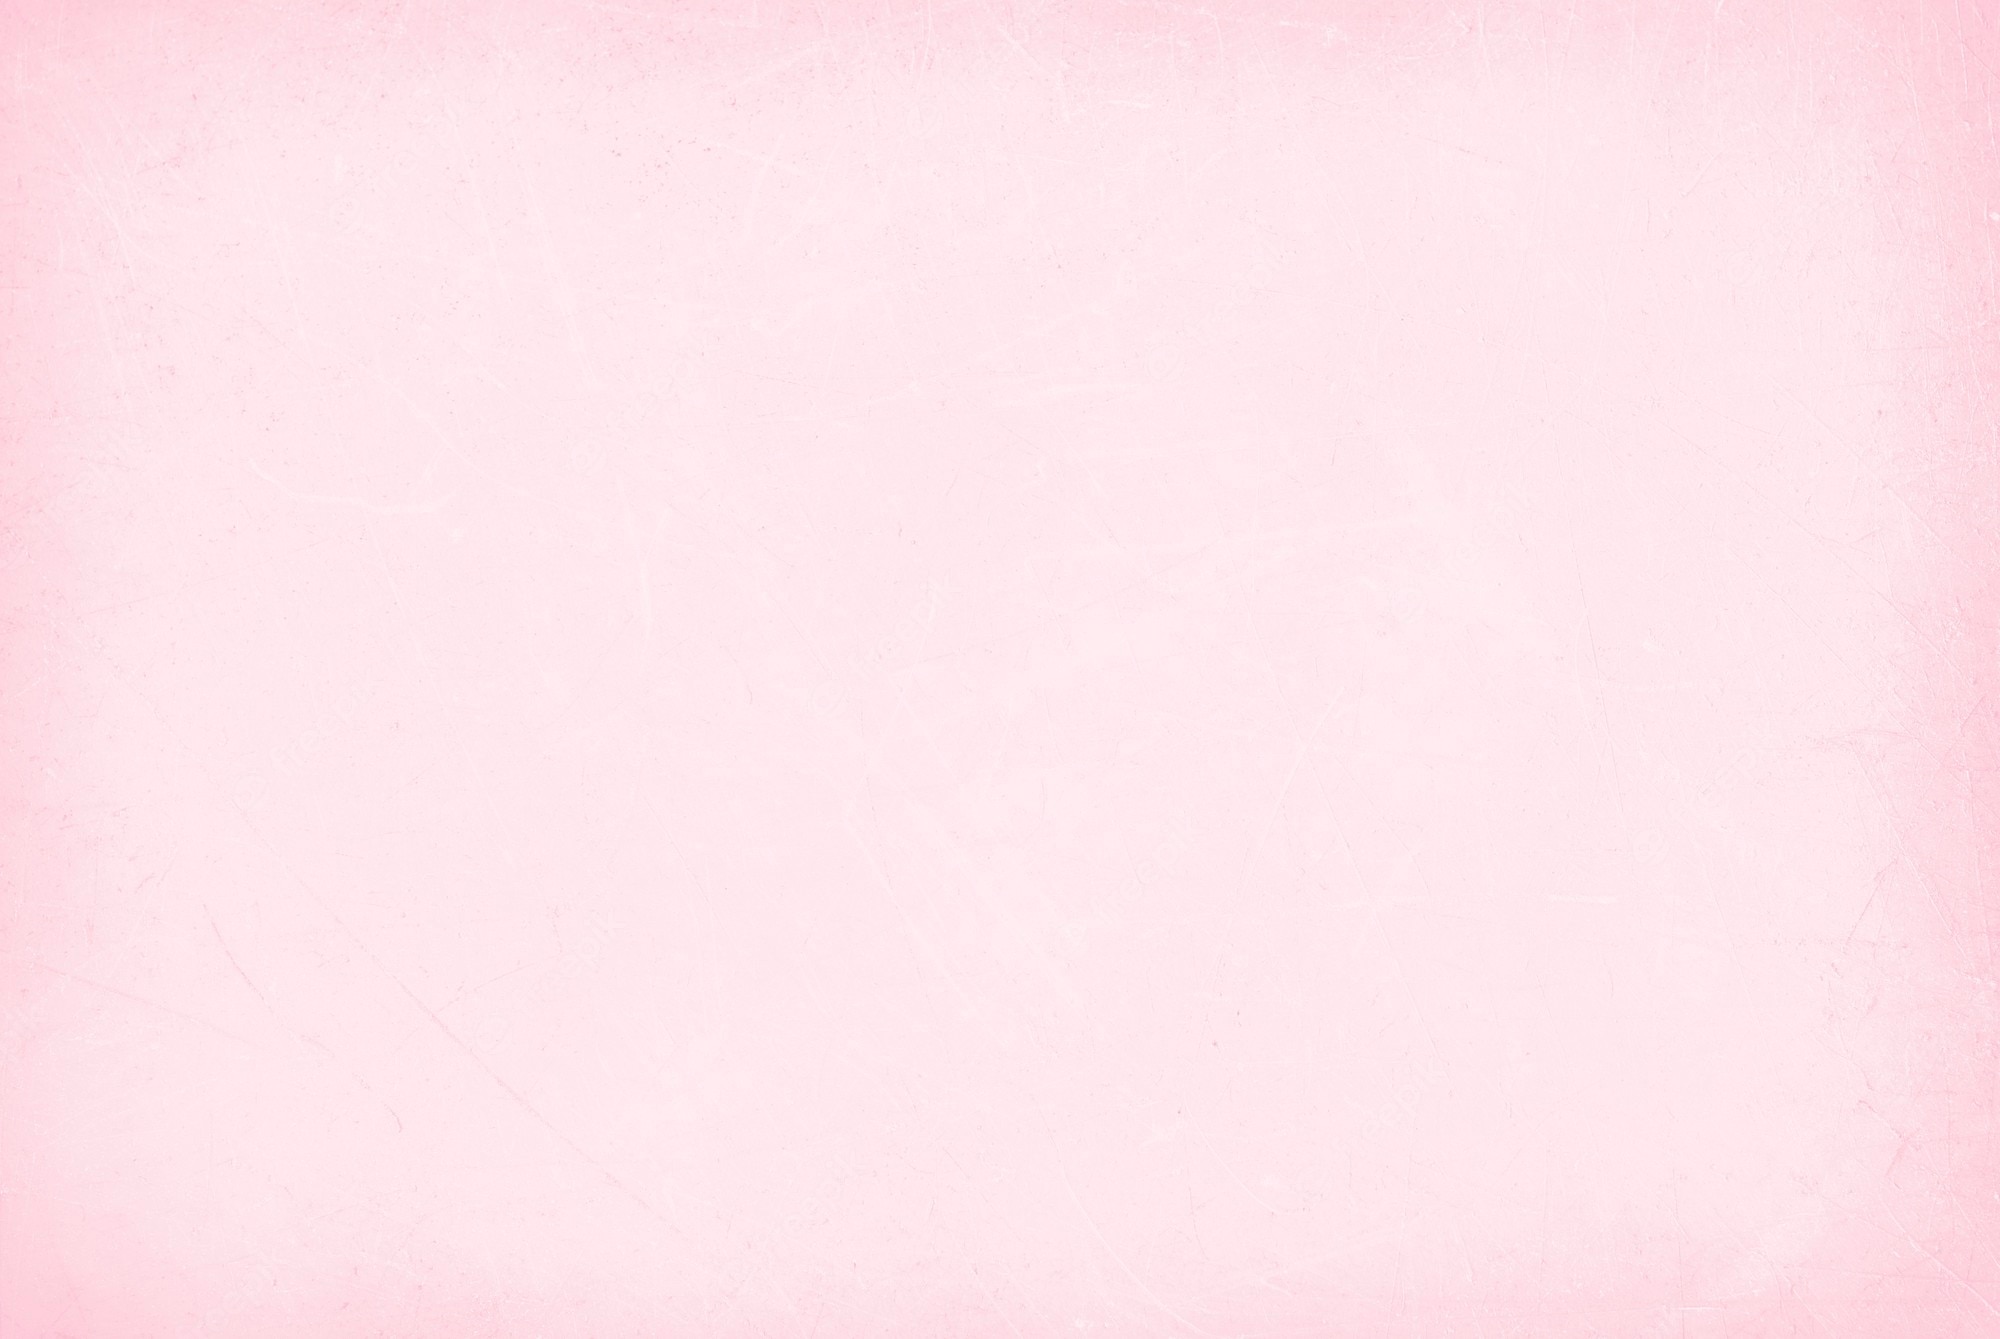 Pink Background Image. Free Vectors, & PSD